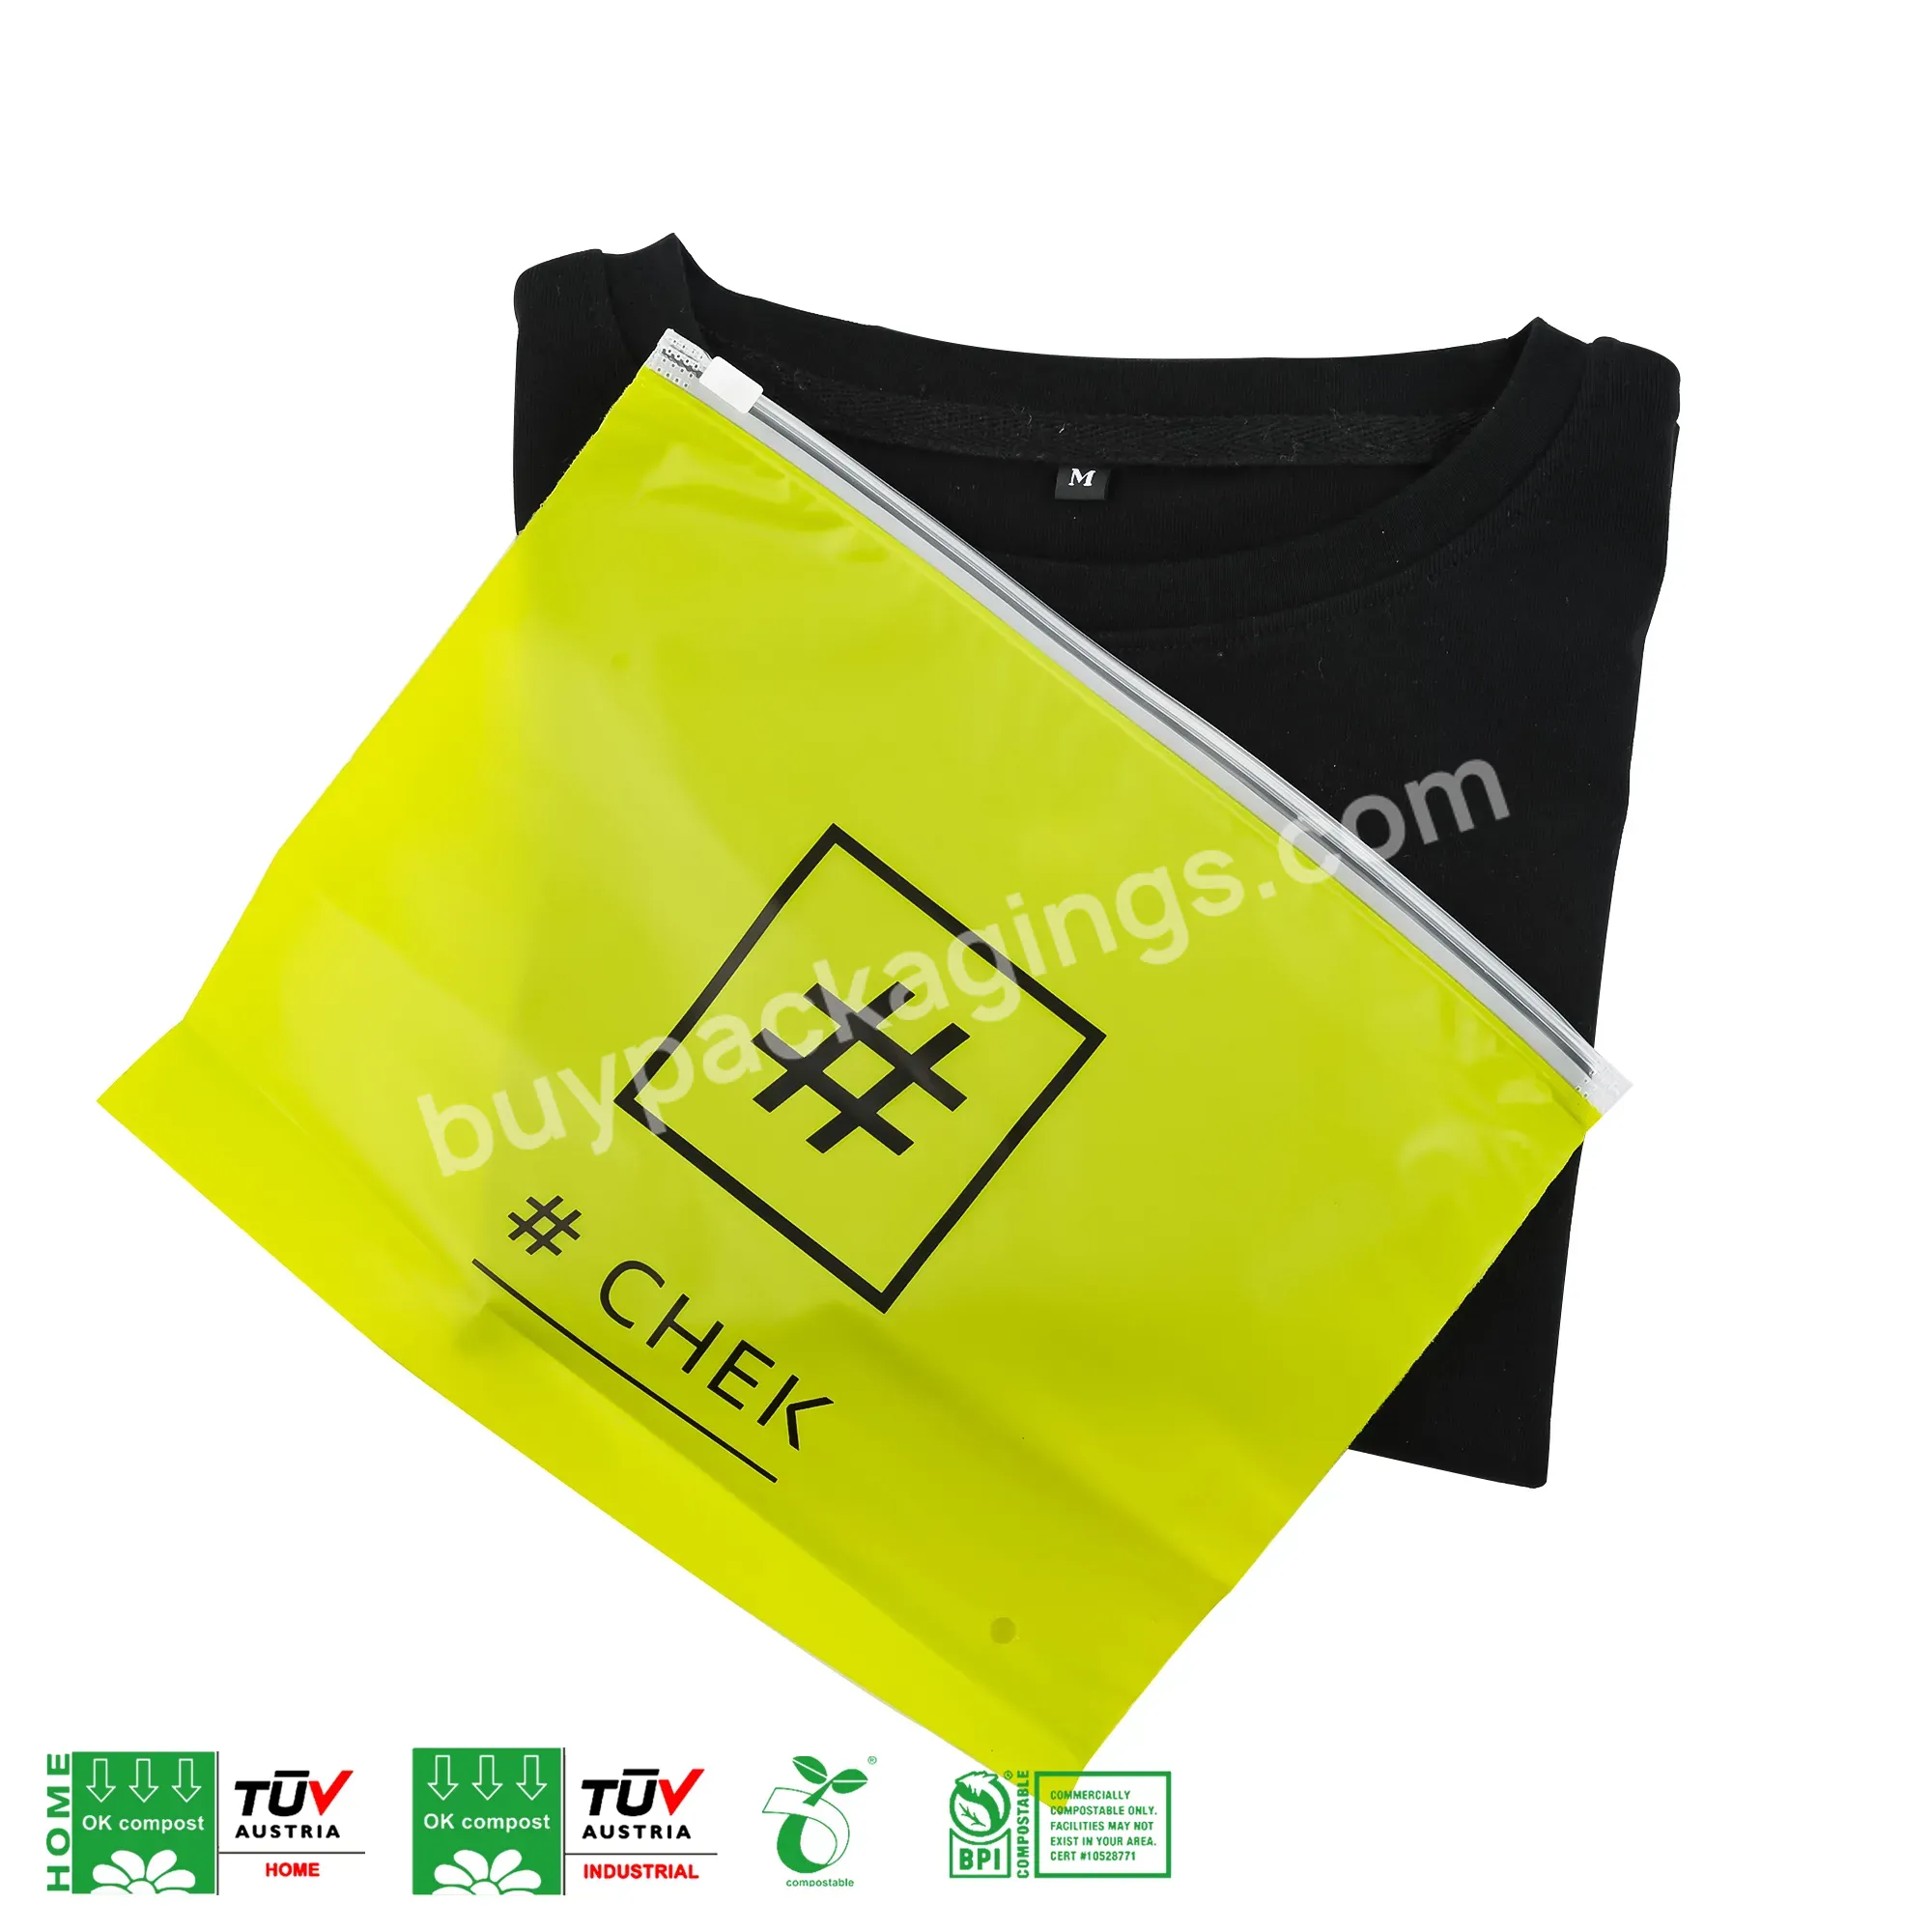 Hot Sale Slider Zip Bags Durable Degradable Pvc Zipper Bag Frosted Smell Proof Ziplock Bag For Storage - Buy Degradable Pvc Zipper Bag,Degradable Pvc Zipper Bag,Smell Proof Ziplock Bag.